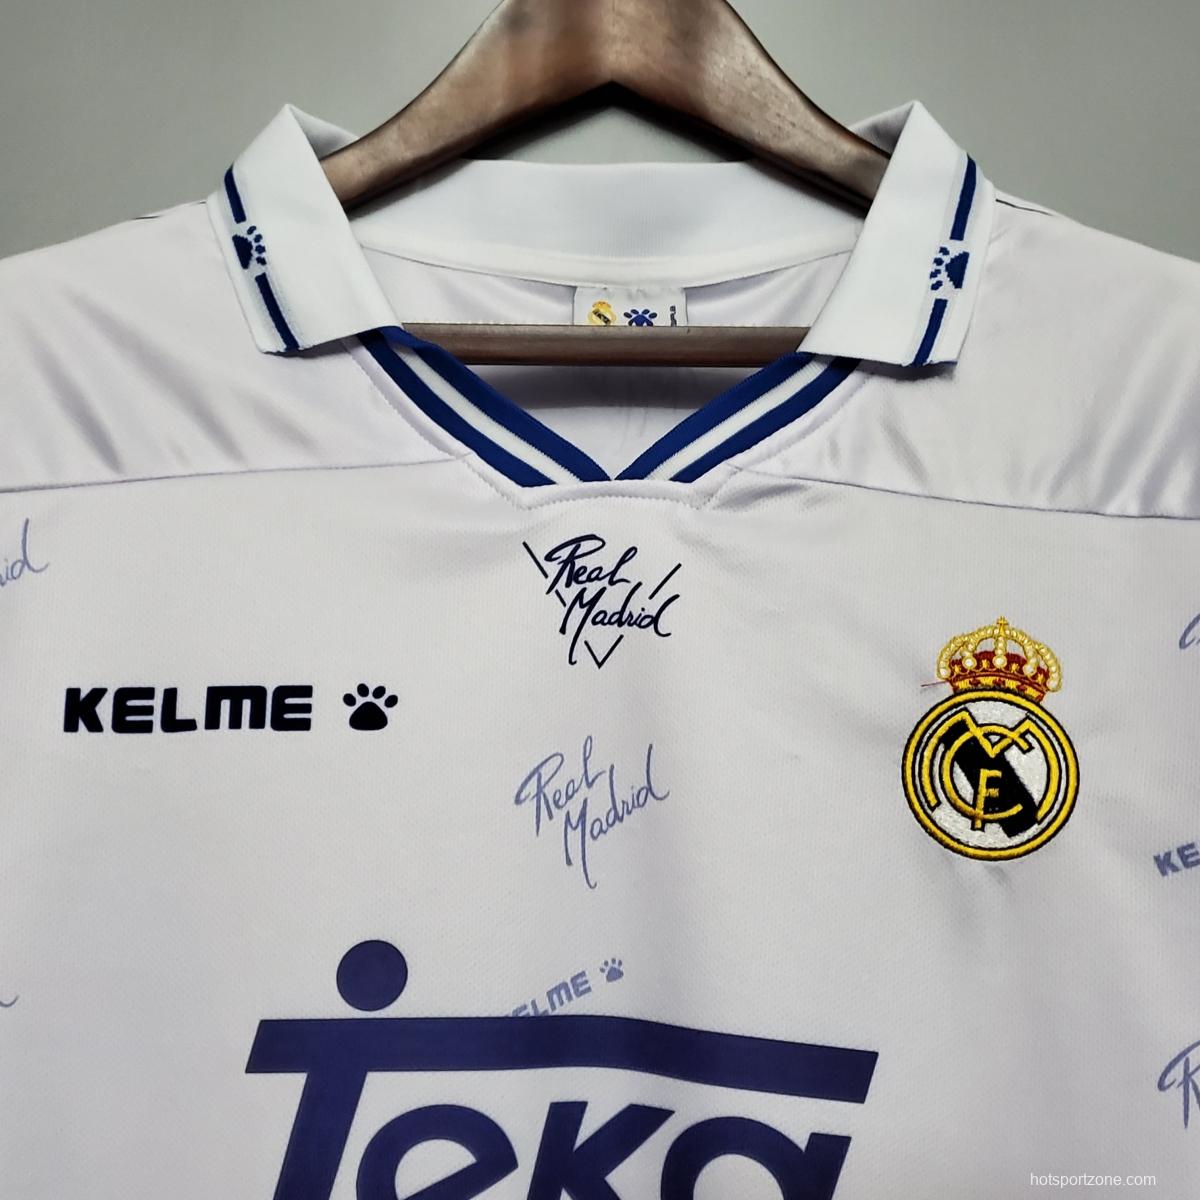 Retro Real Madrid 94/96 home Soccer Jersey